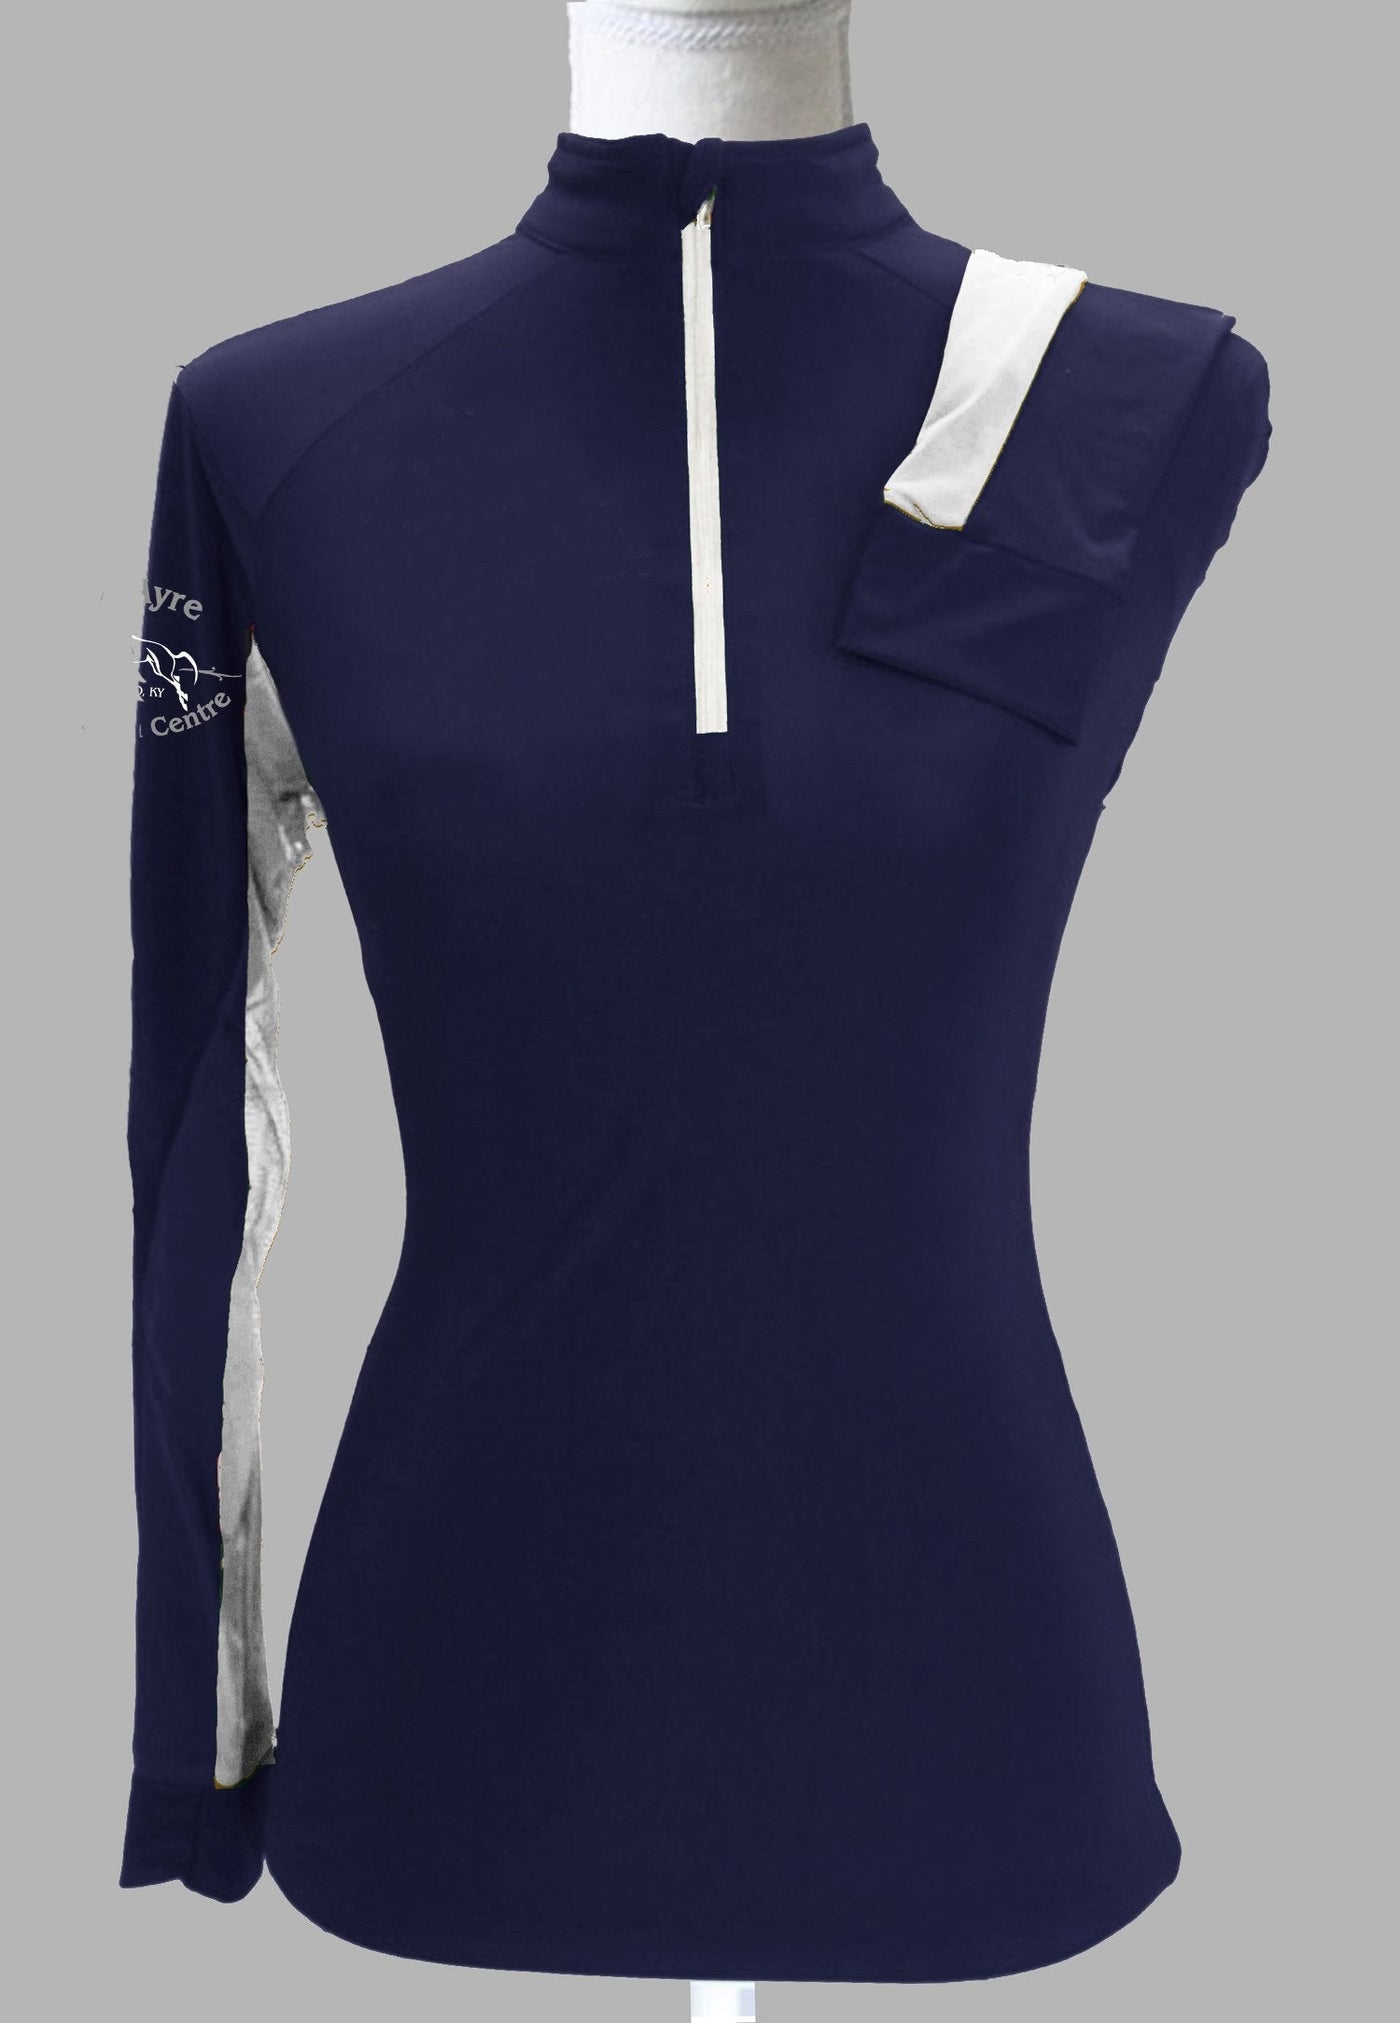 GlenAyre Equestrian Custom Sun Shirt - Navy with White Accents